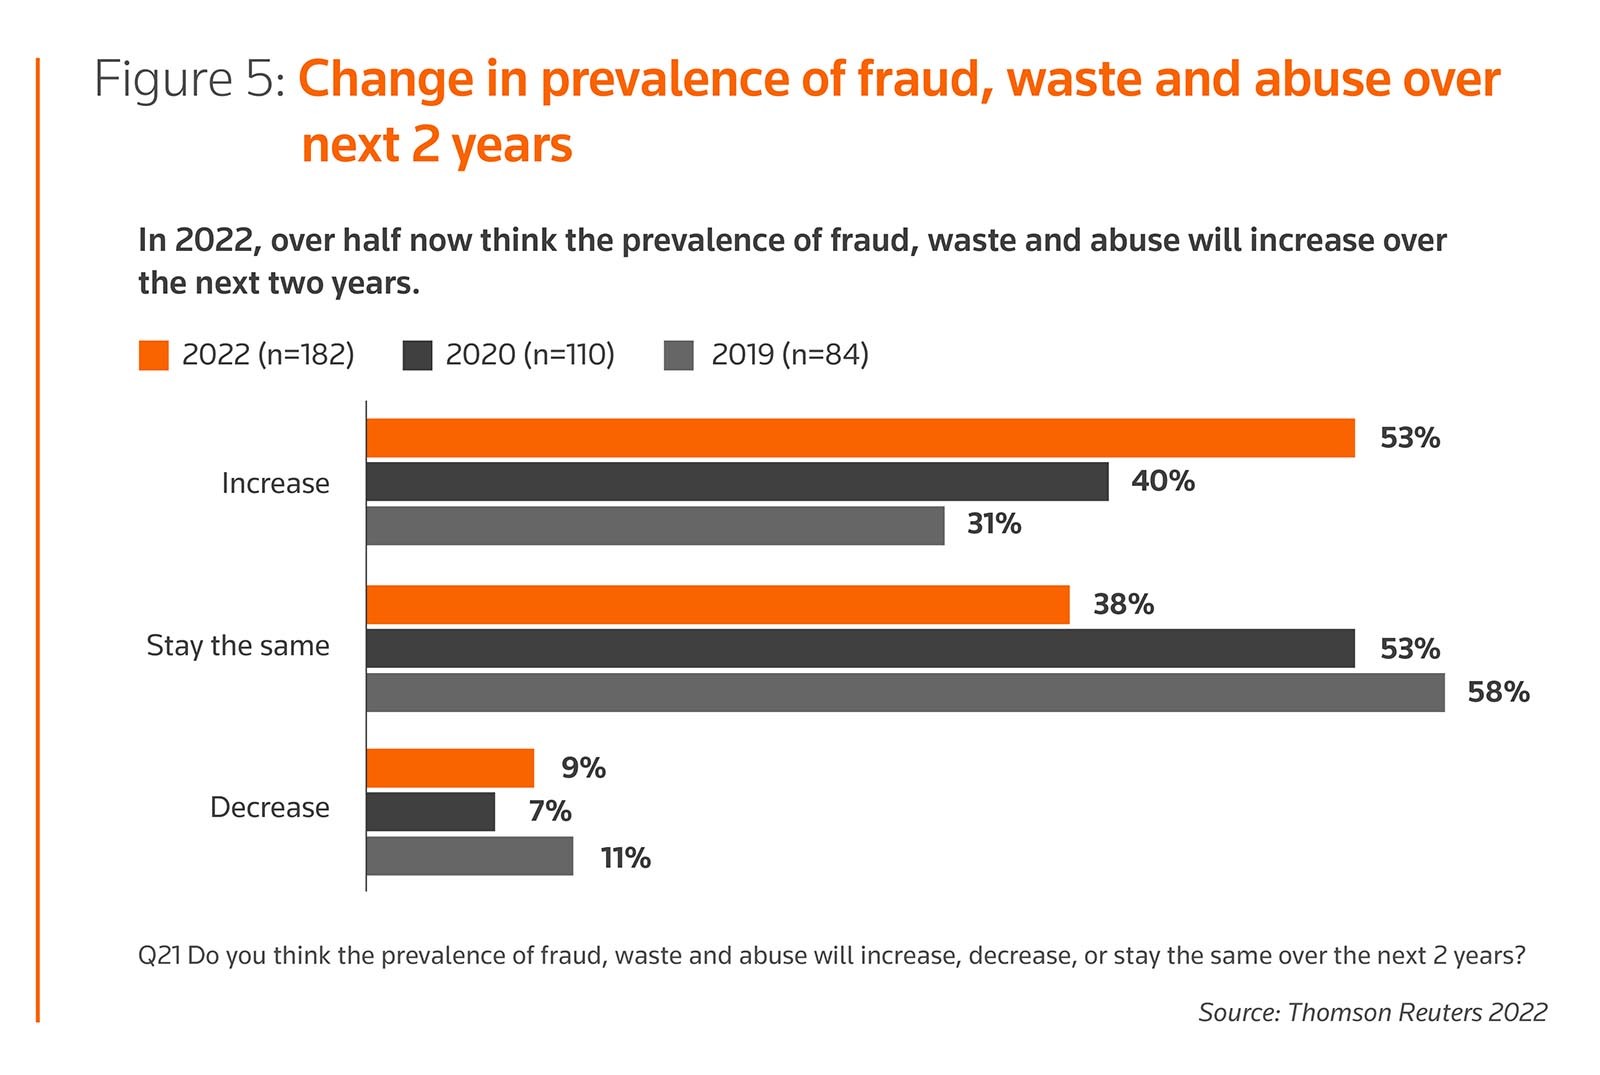 Change in prevalence of fraud, waste and abuse over next 2 years